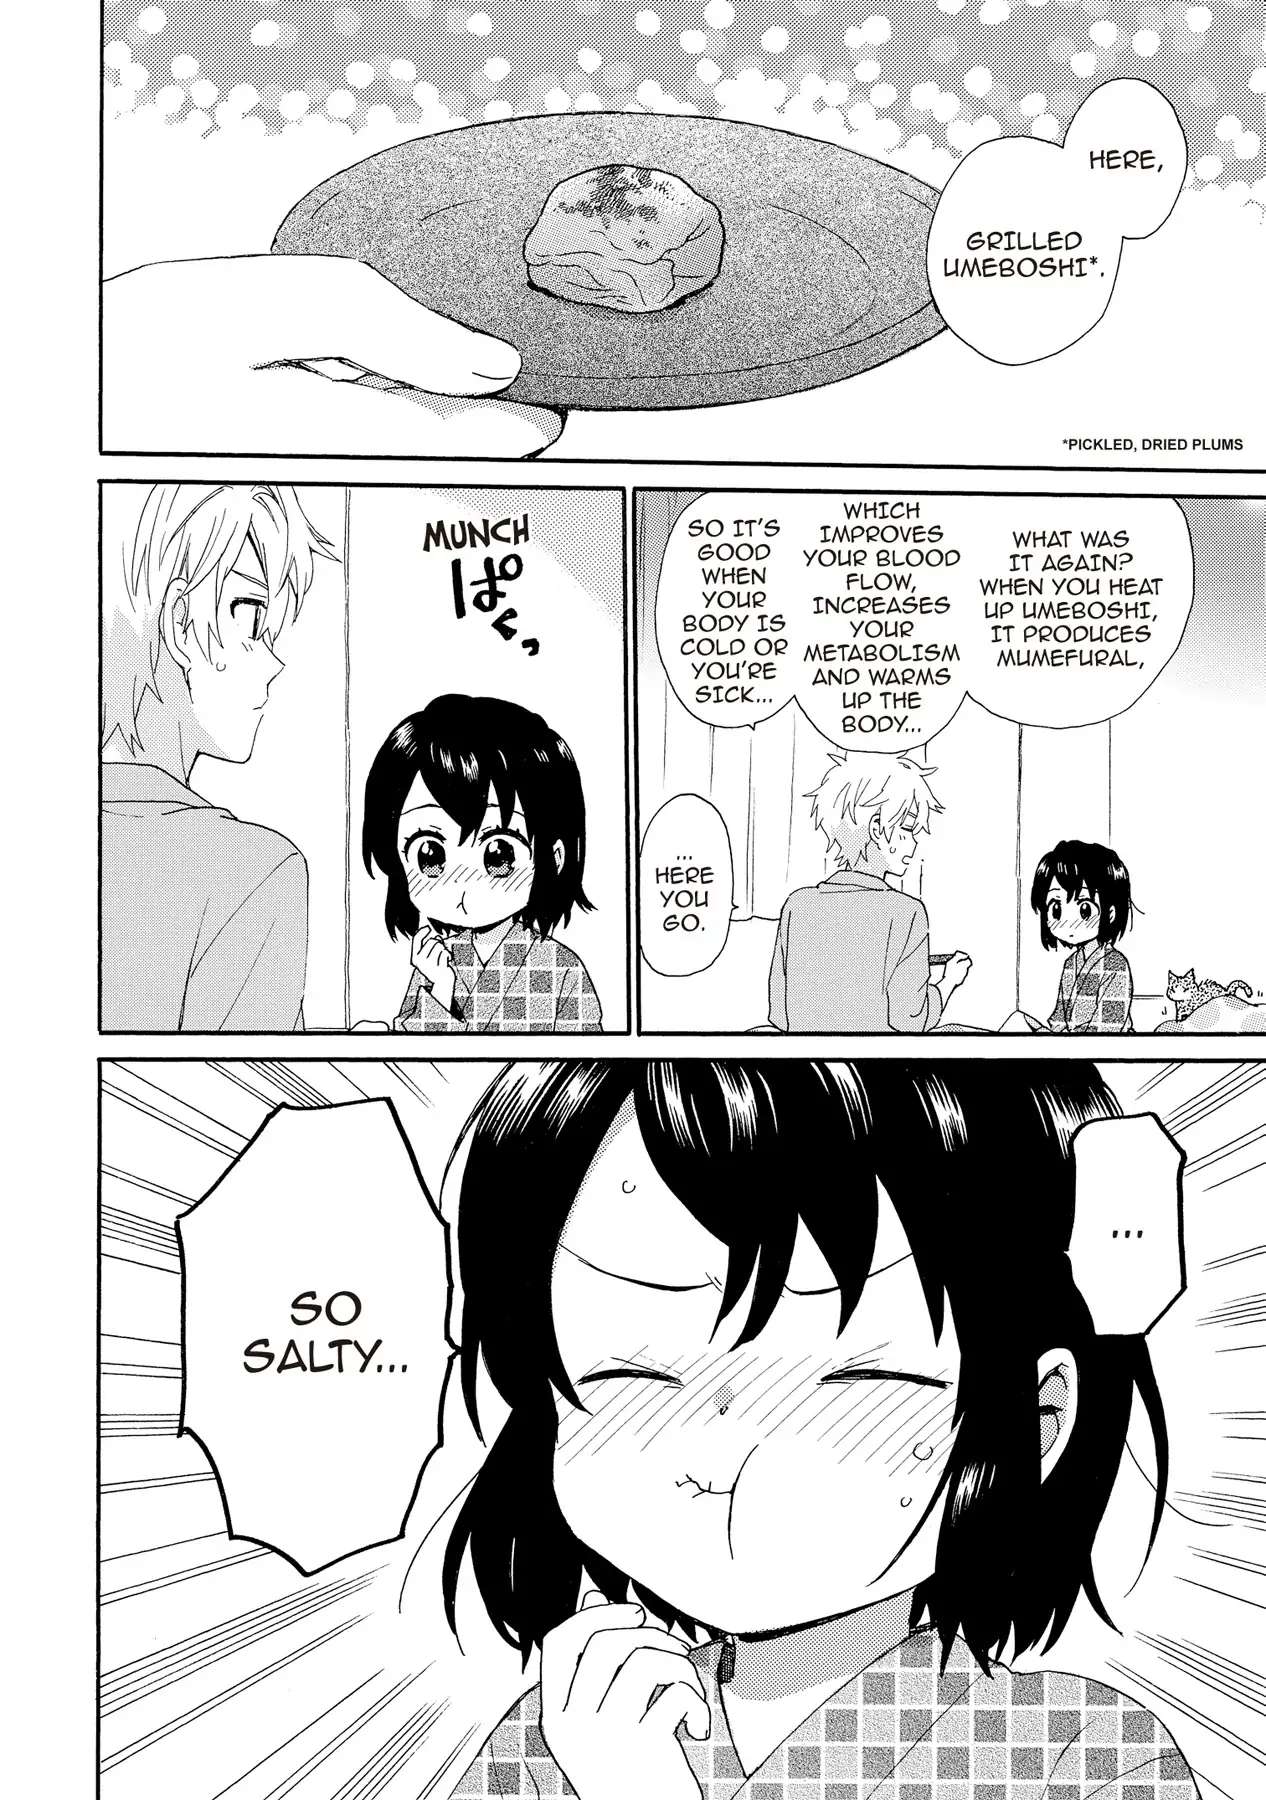 The Cute Little Granny Girl Hinata-chan - chapter 93 - #4